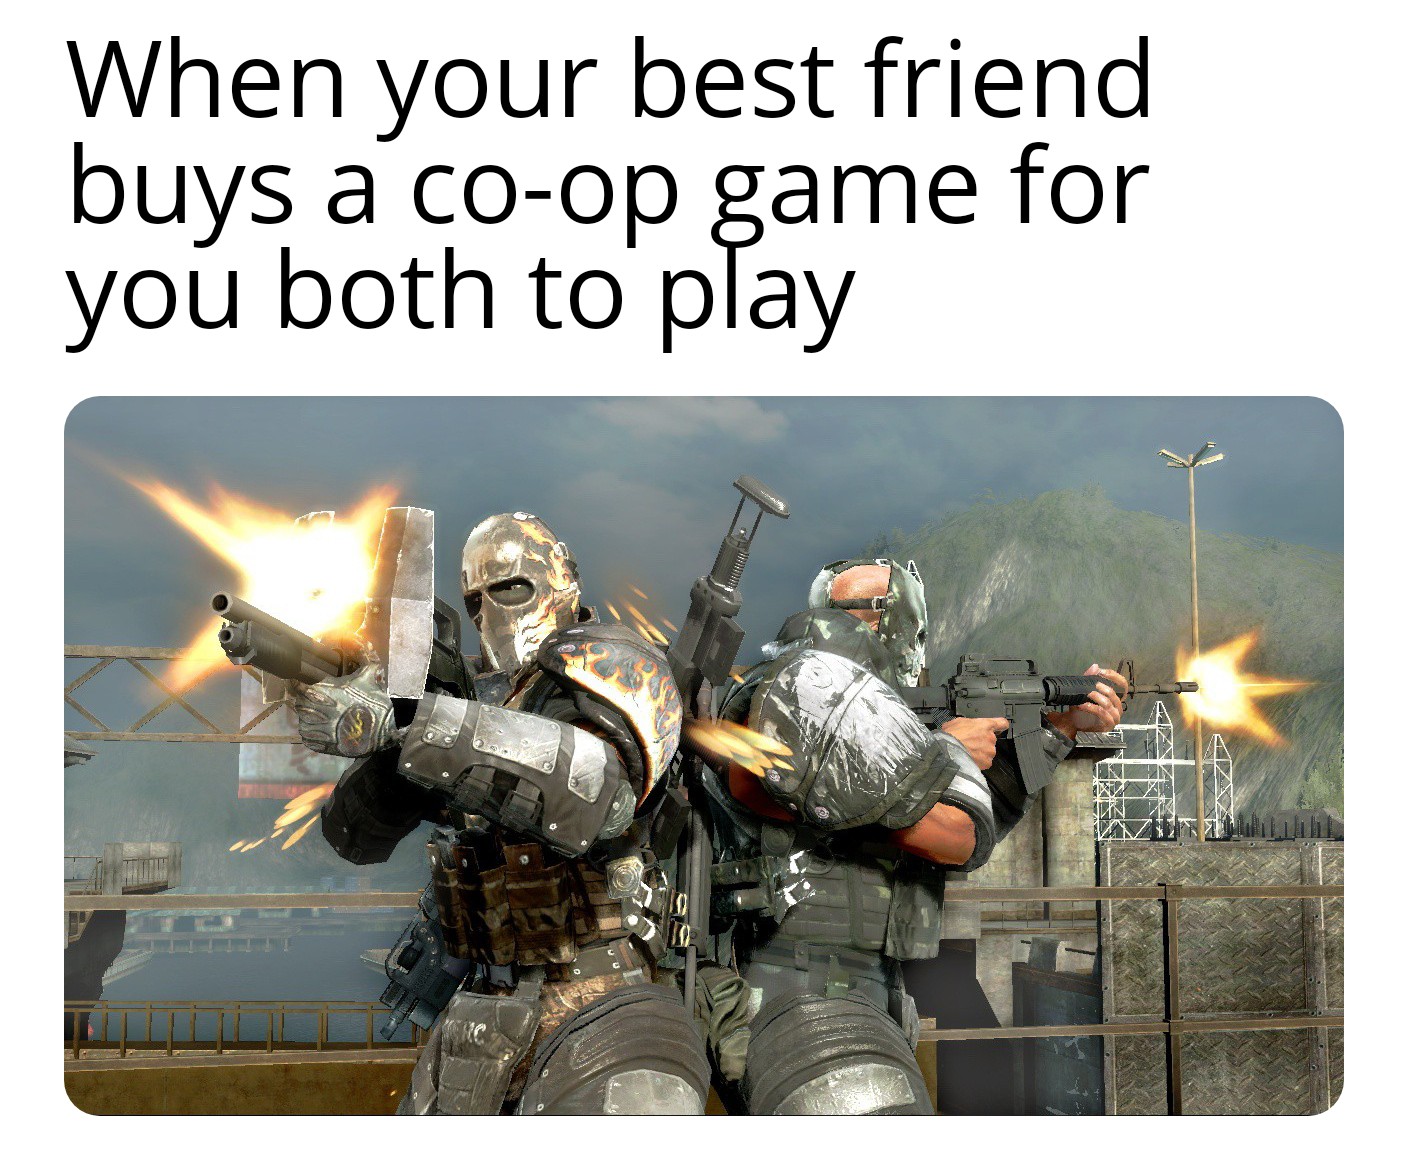 gaming memes for all - army of two game - When your best friend buys a coop game for you both to play wwwwww